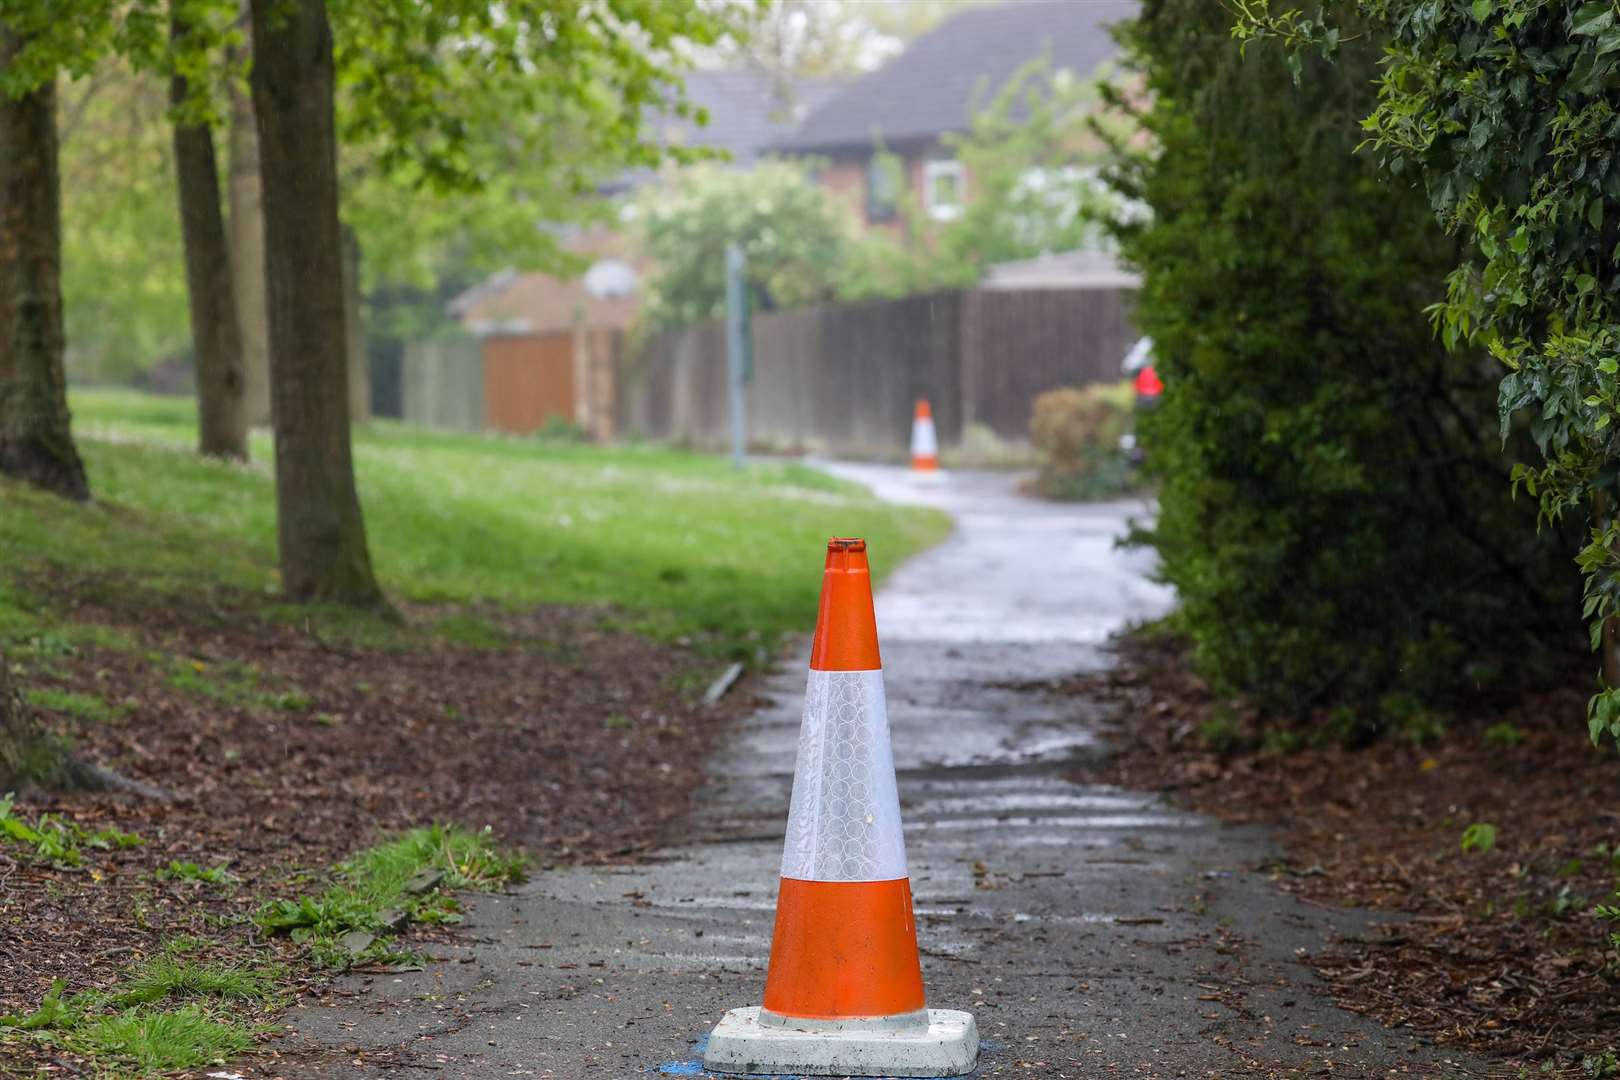 Cones have been placed for safety reasons where manhole covers were stolen in one road Picture: UKNIP